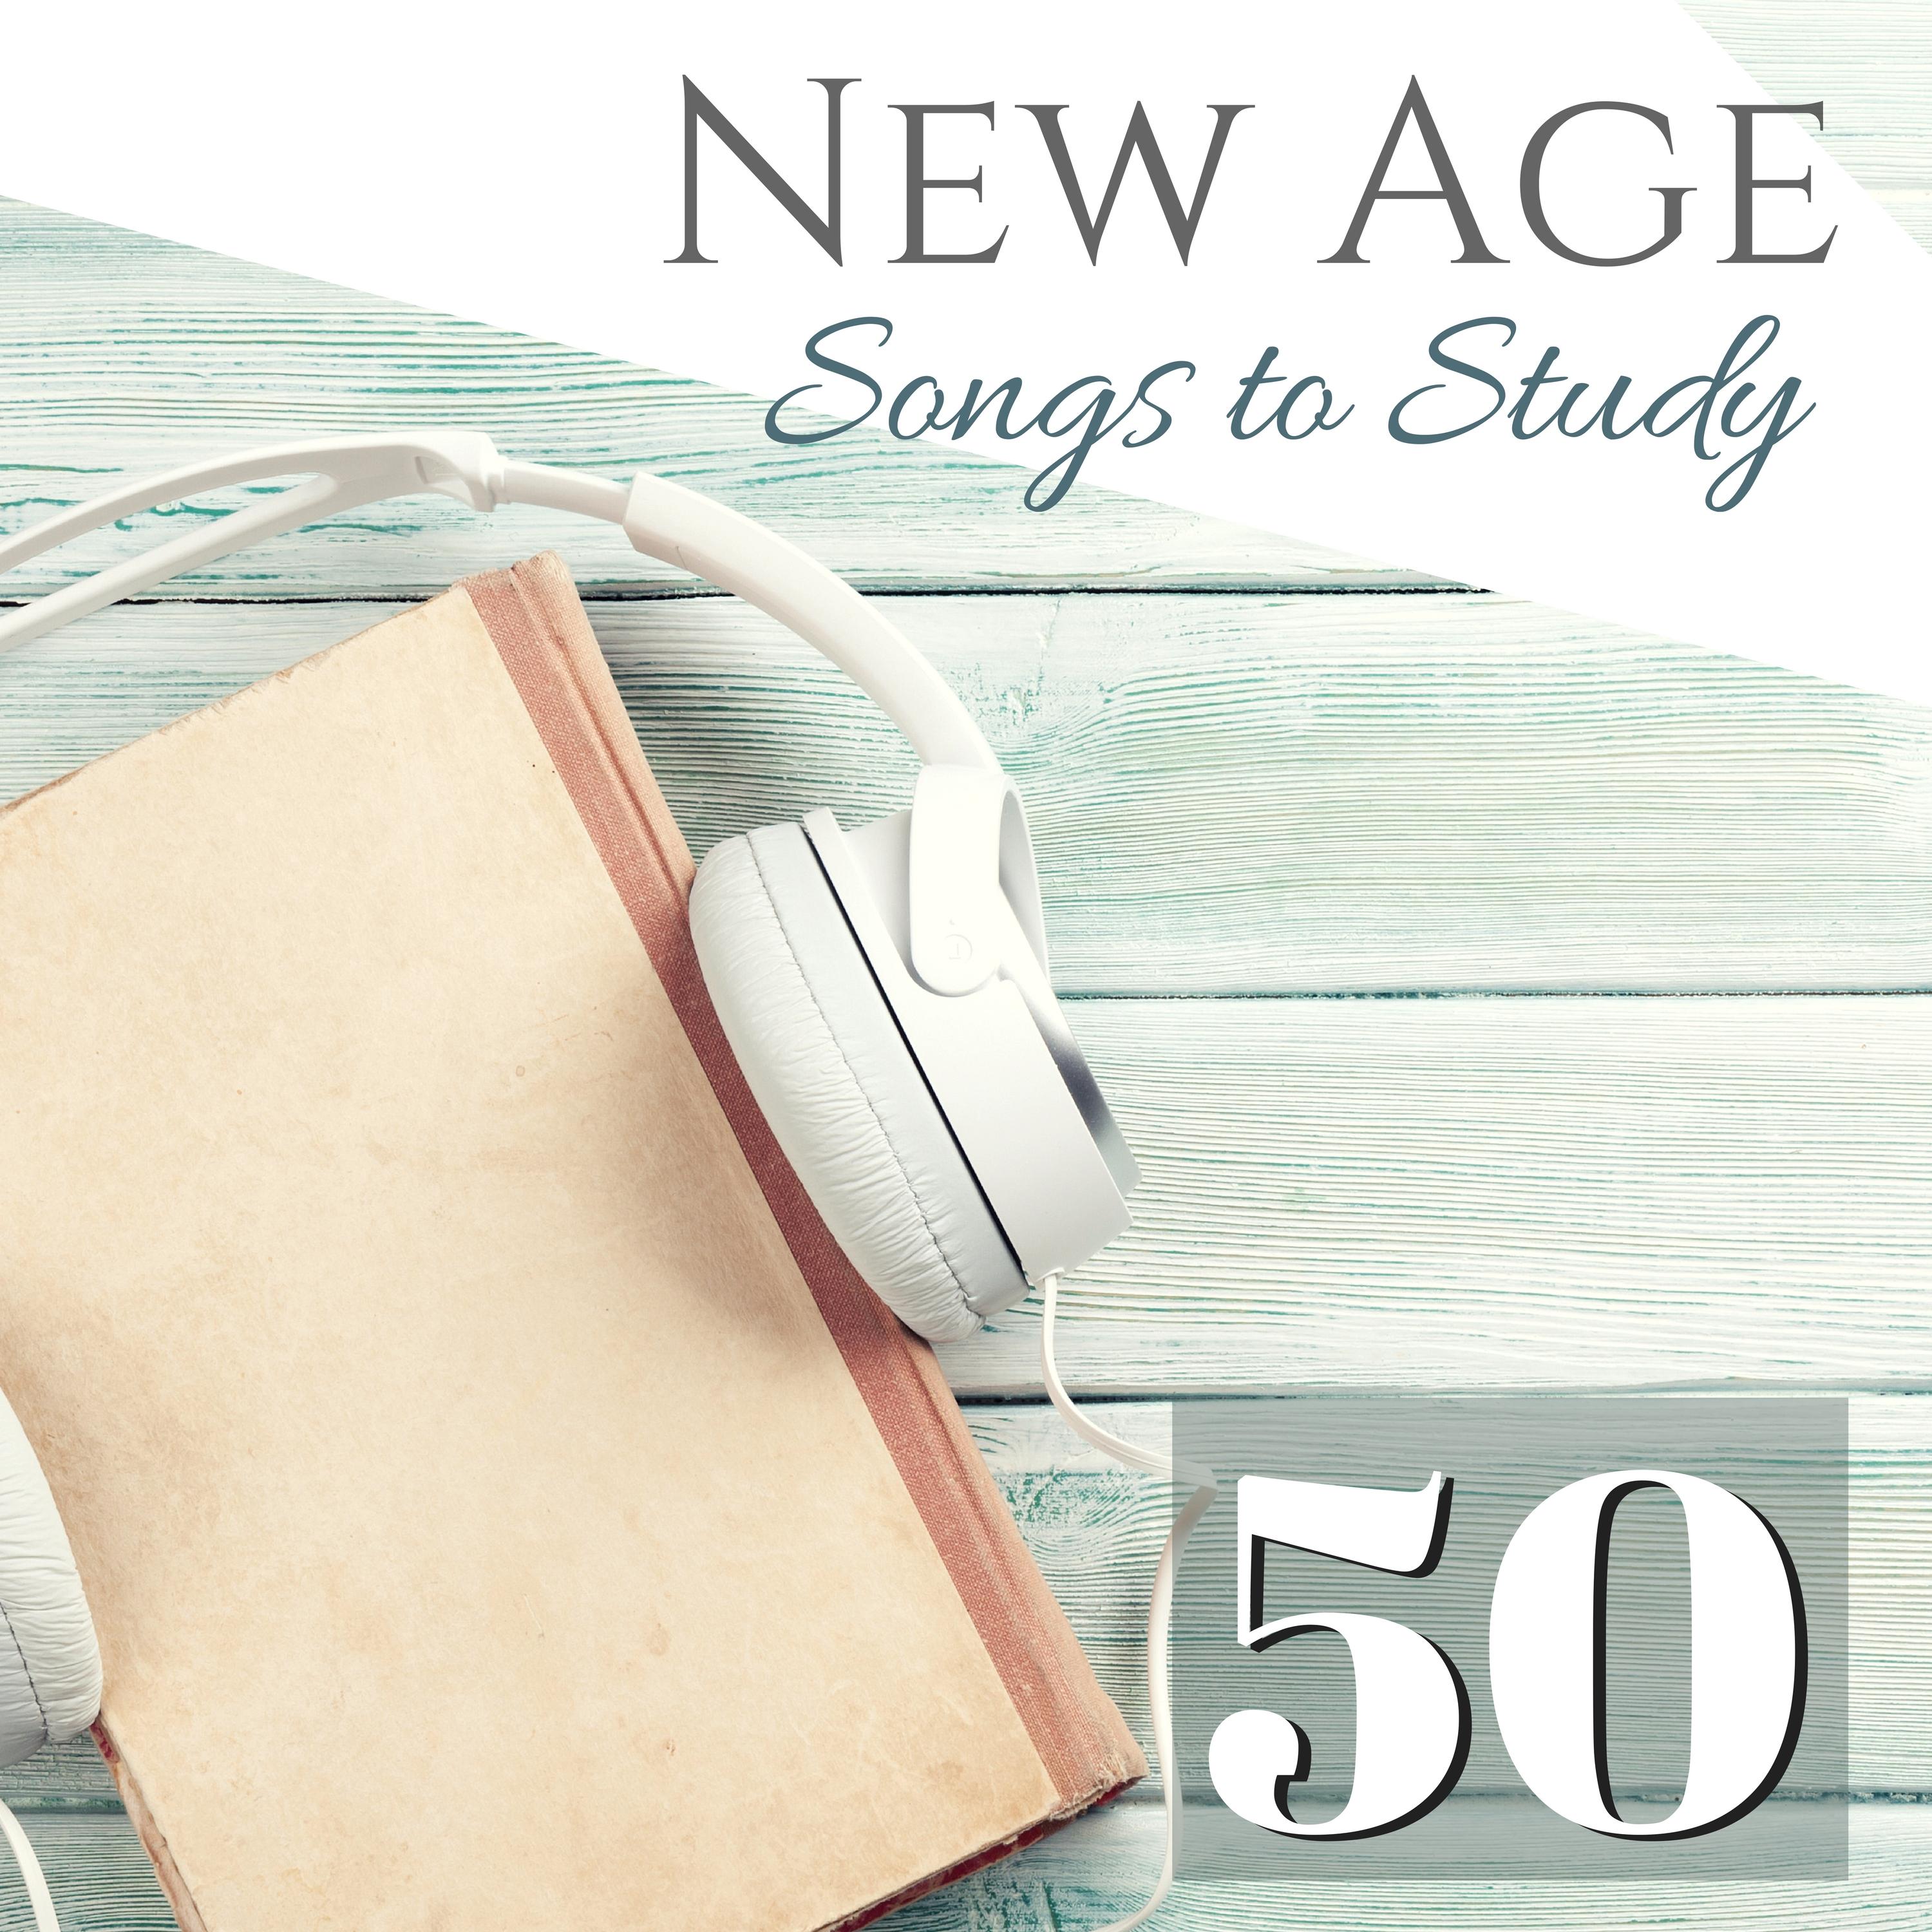 50 New Age Songs to Study - Music to get Back to School after White Week Holidays